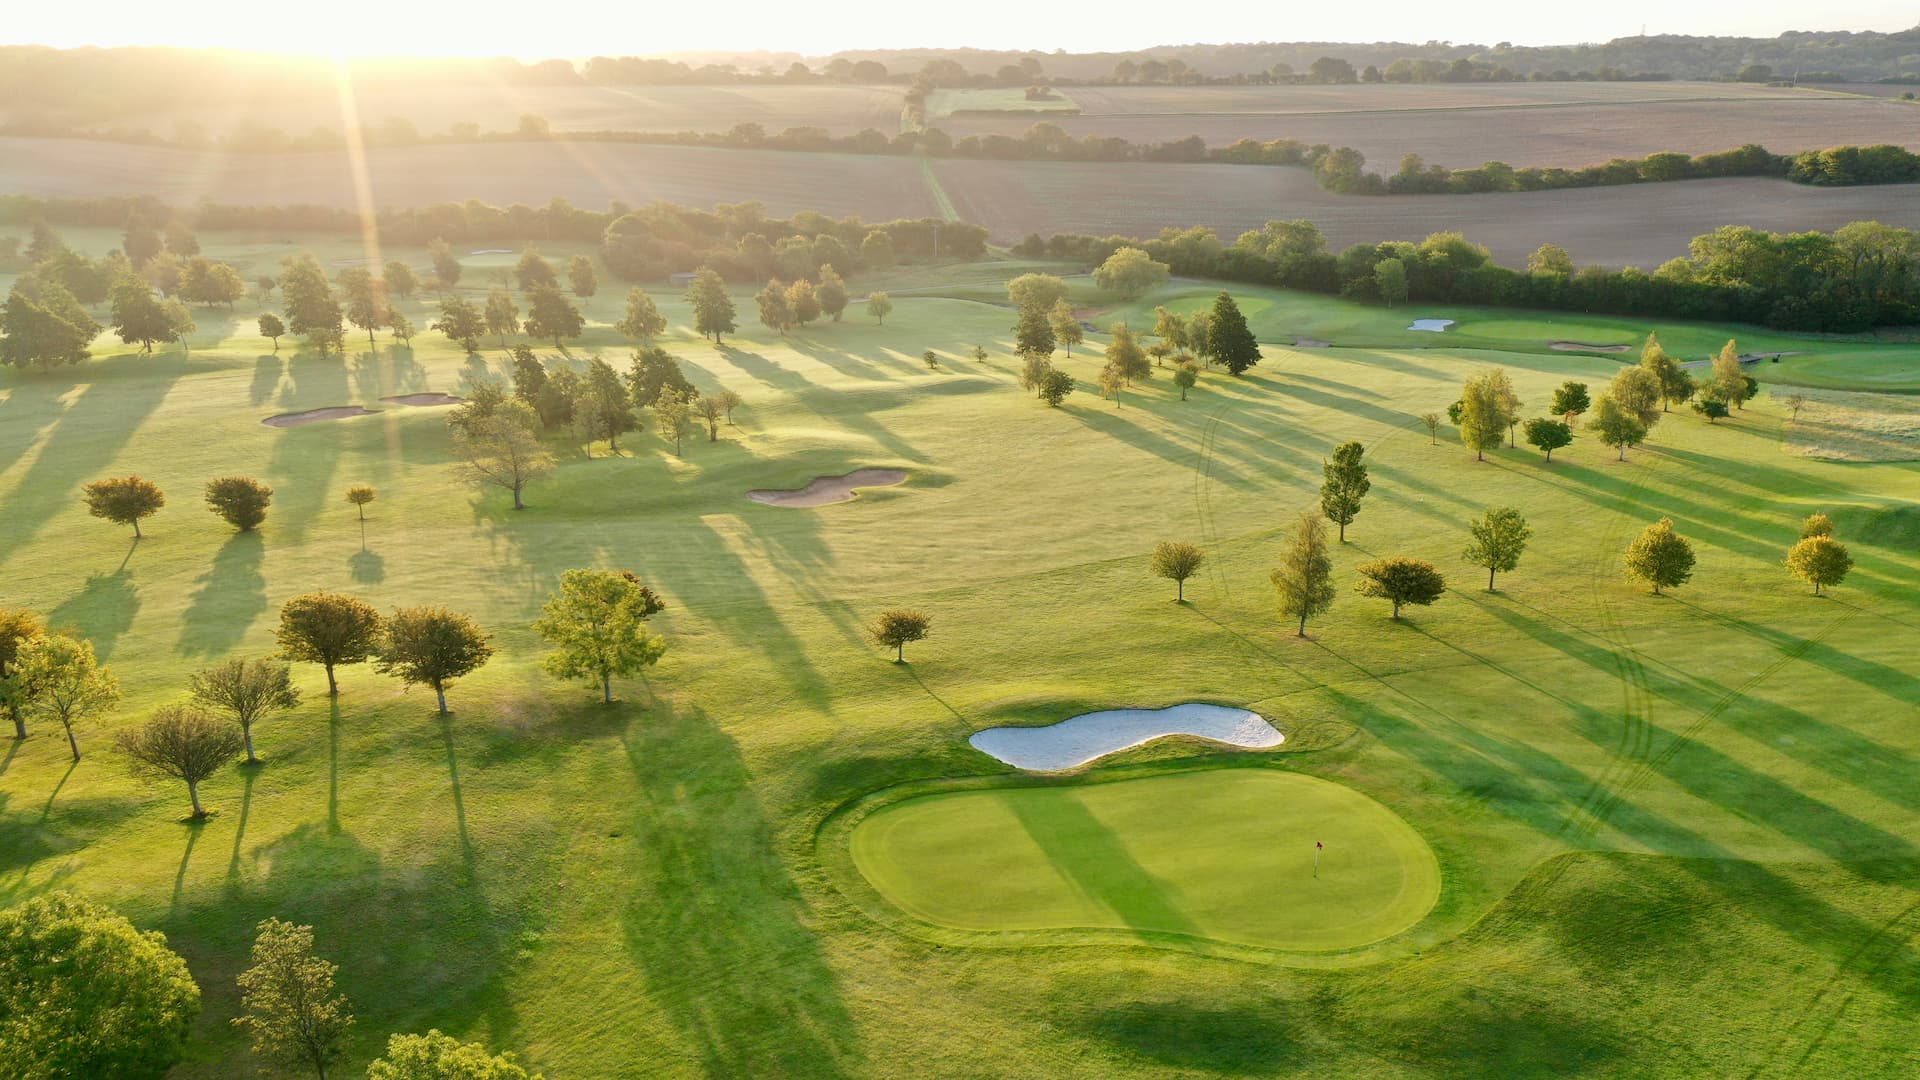 Aerial view of Chesfield Downs 18-hole golf course